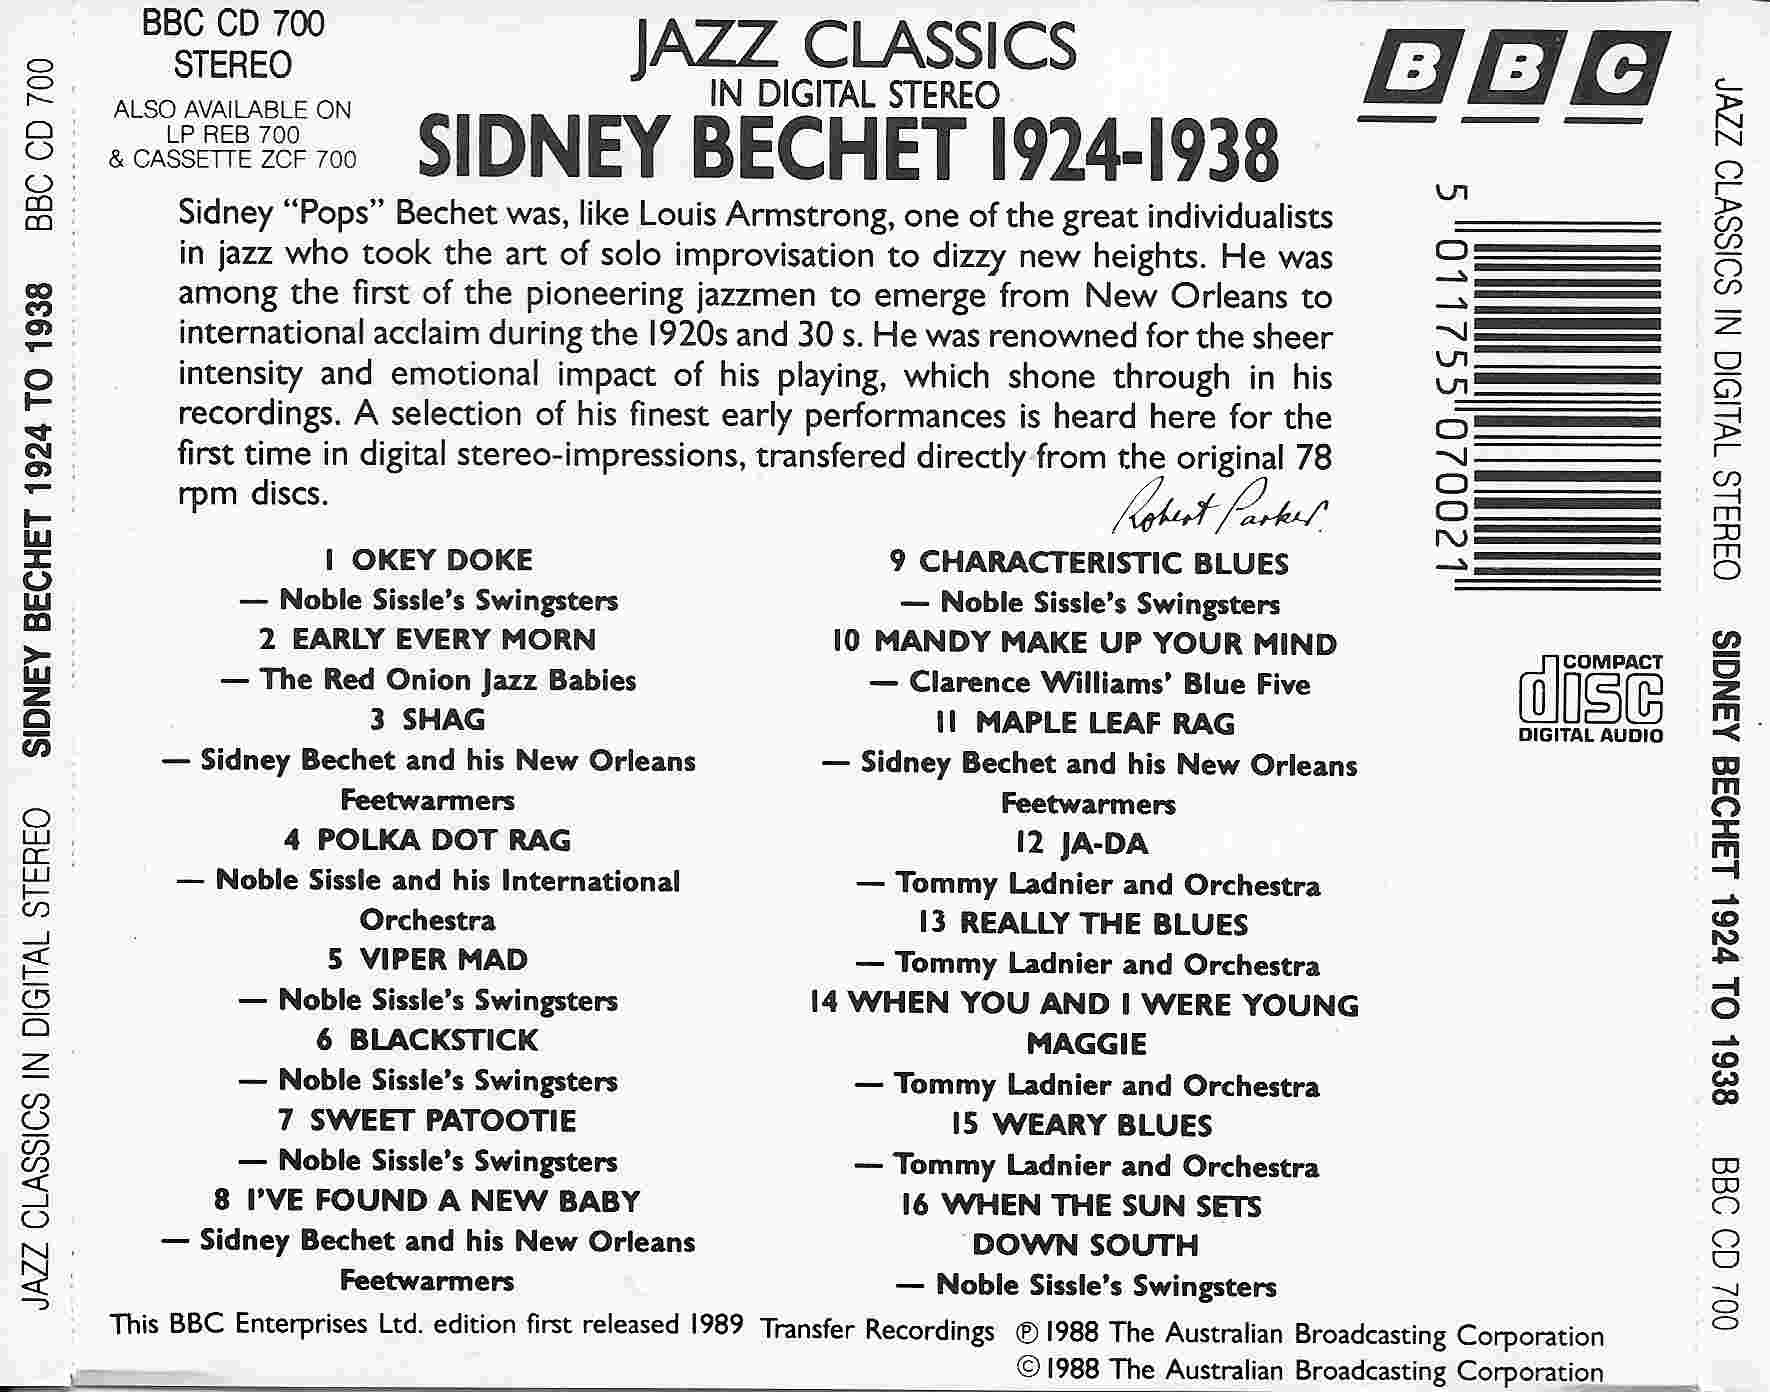 Picture of BBCCD700 Jazz classics - Sidney Bechet 1925 - 1928 by artist Sidney Bechet  from the BBC records and Tapes library